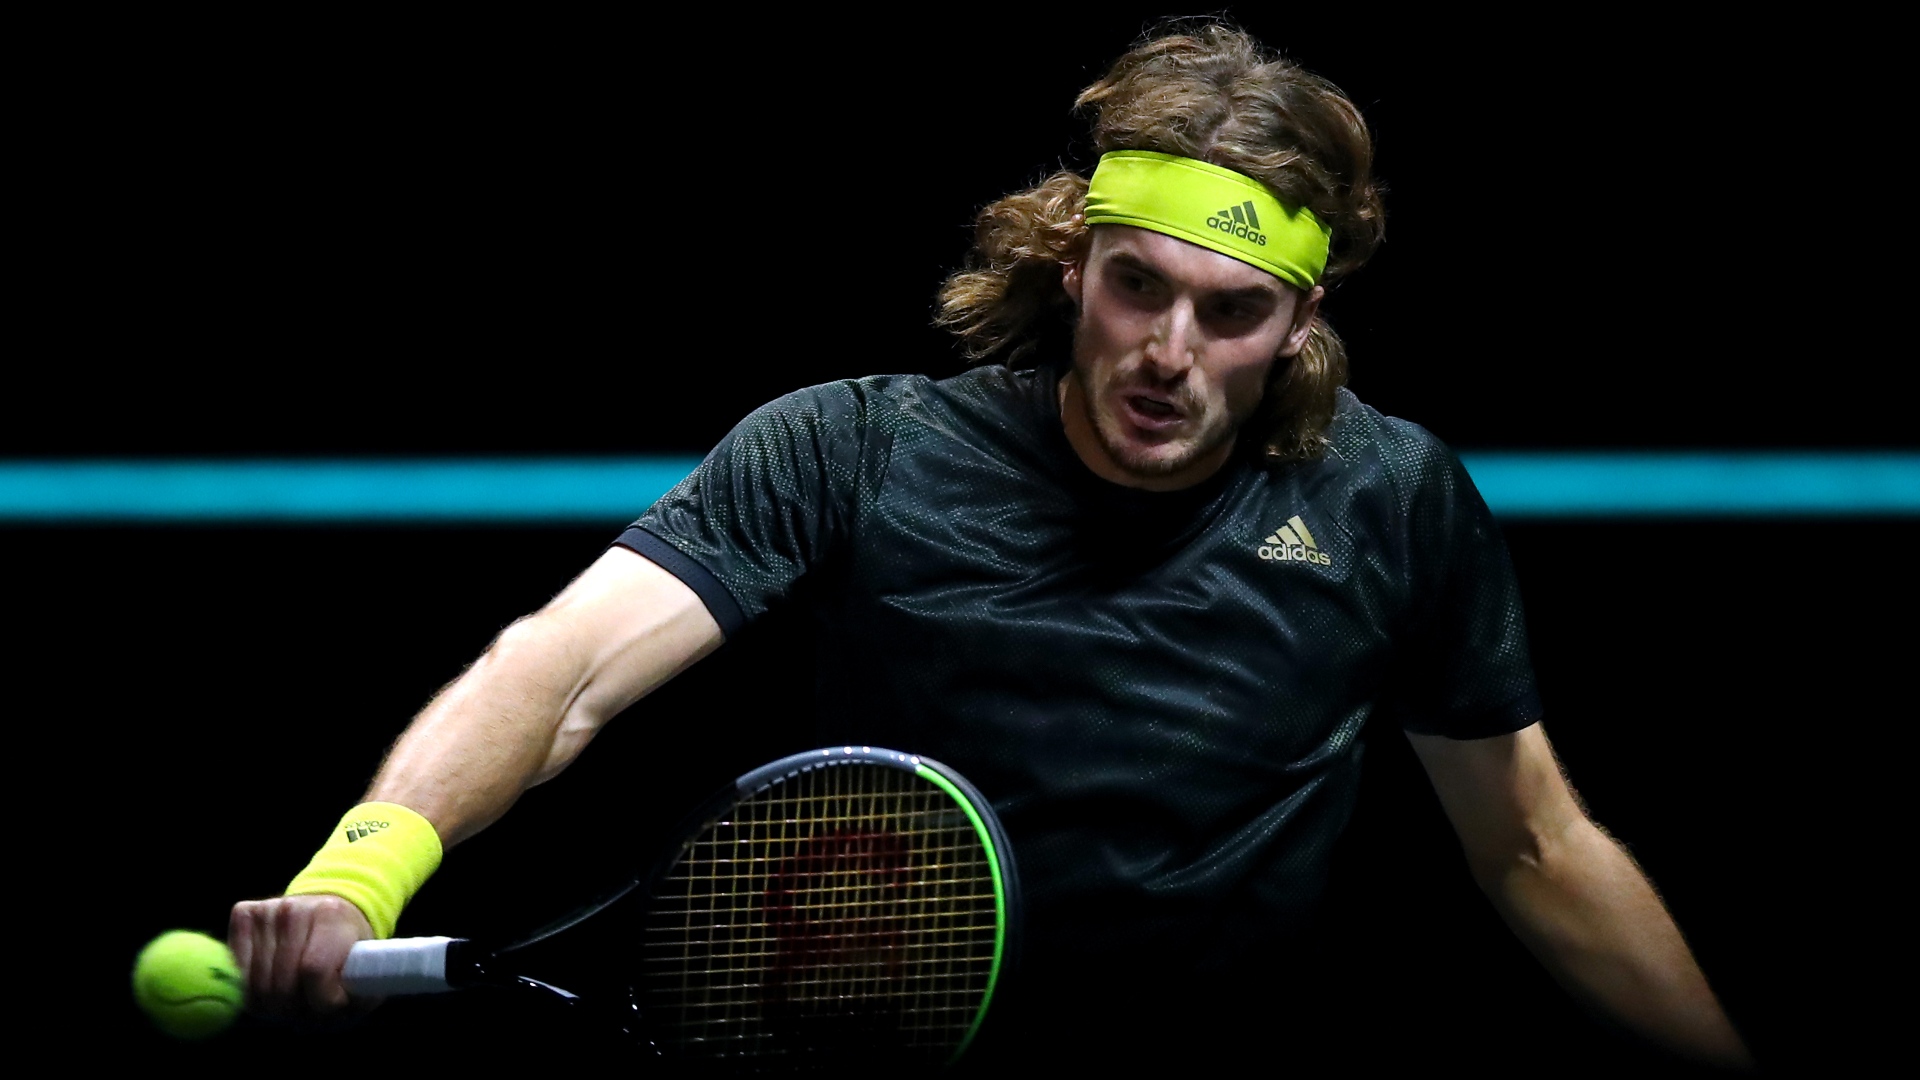 Stefanos Tsitsipas kept his hopes of glory in Rotterdam alive with a bruising win, but David Goffin was eliminated.